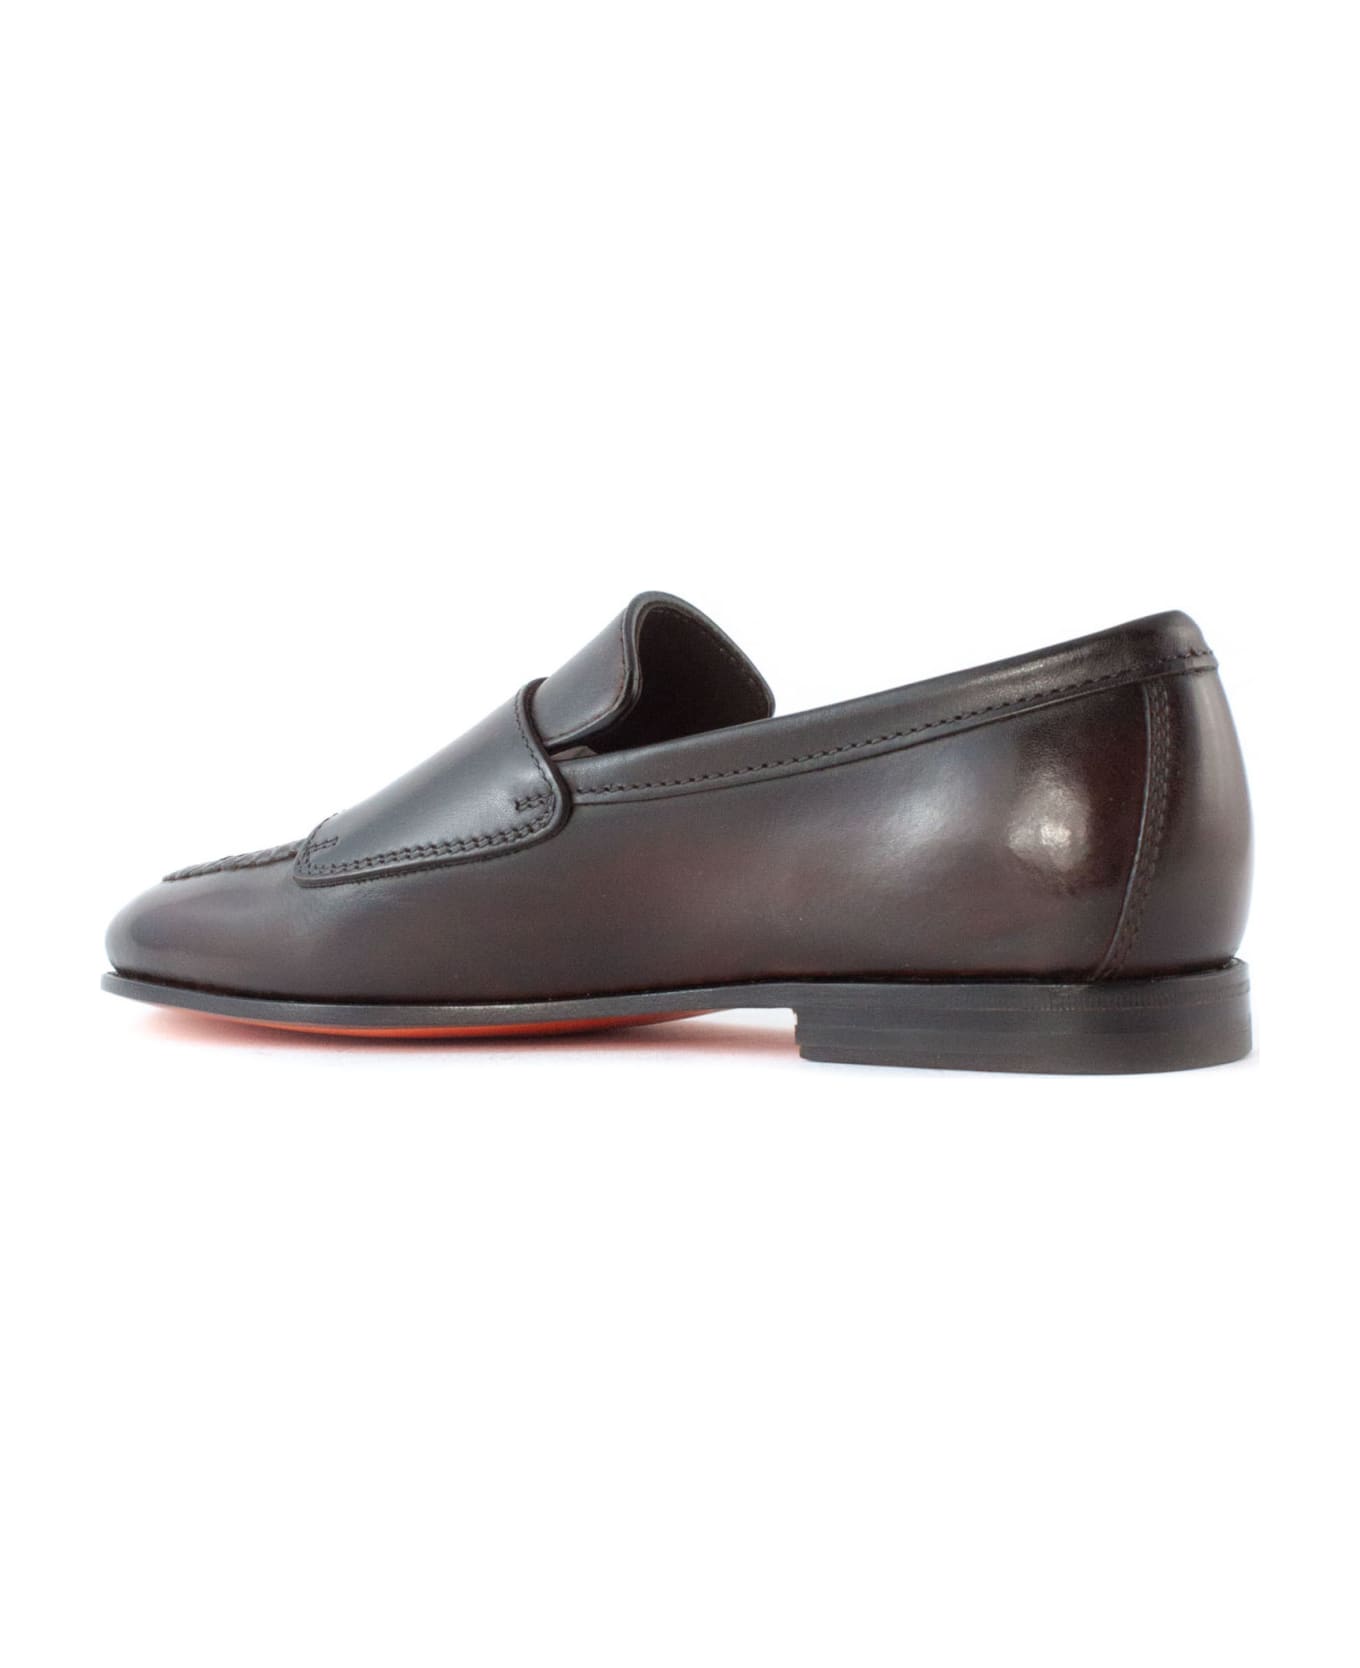 Santoni Brown Leather Double-buckle Loafer - BROWN